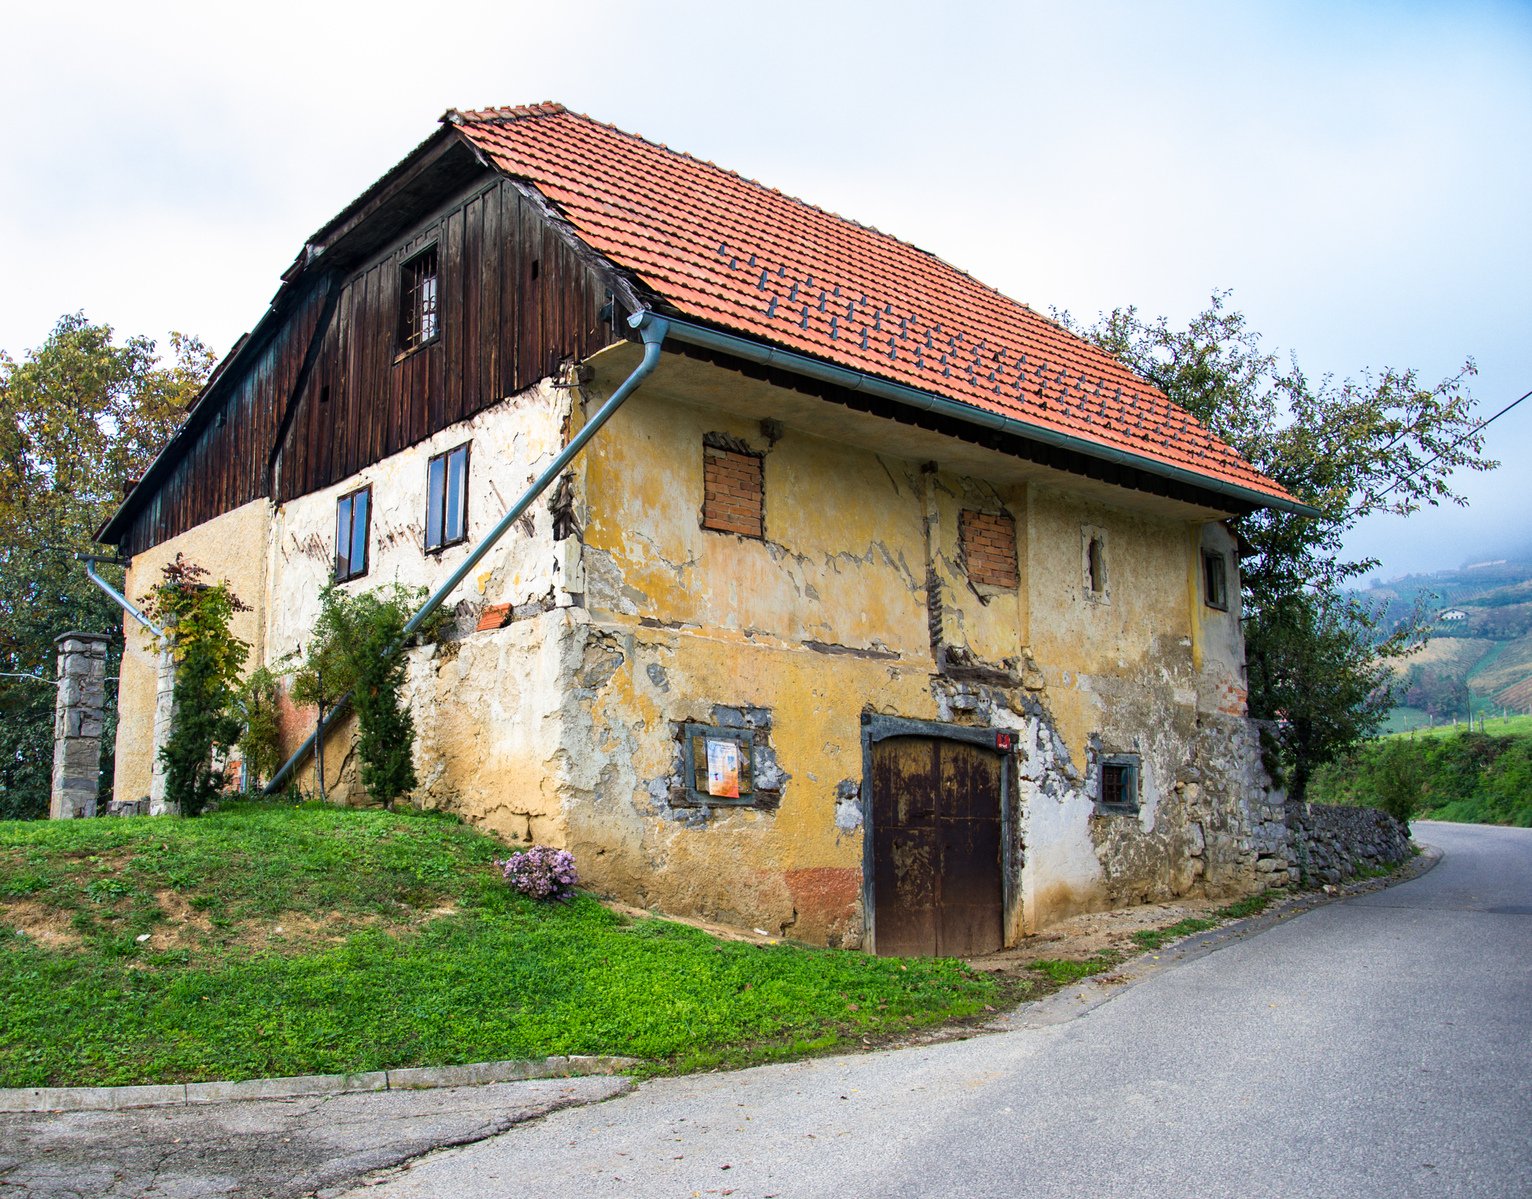 an old abandoned building is seen in the background